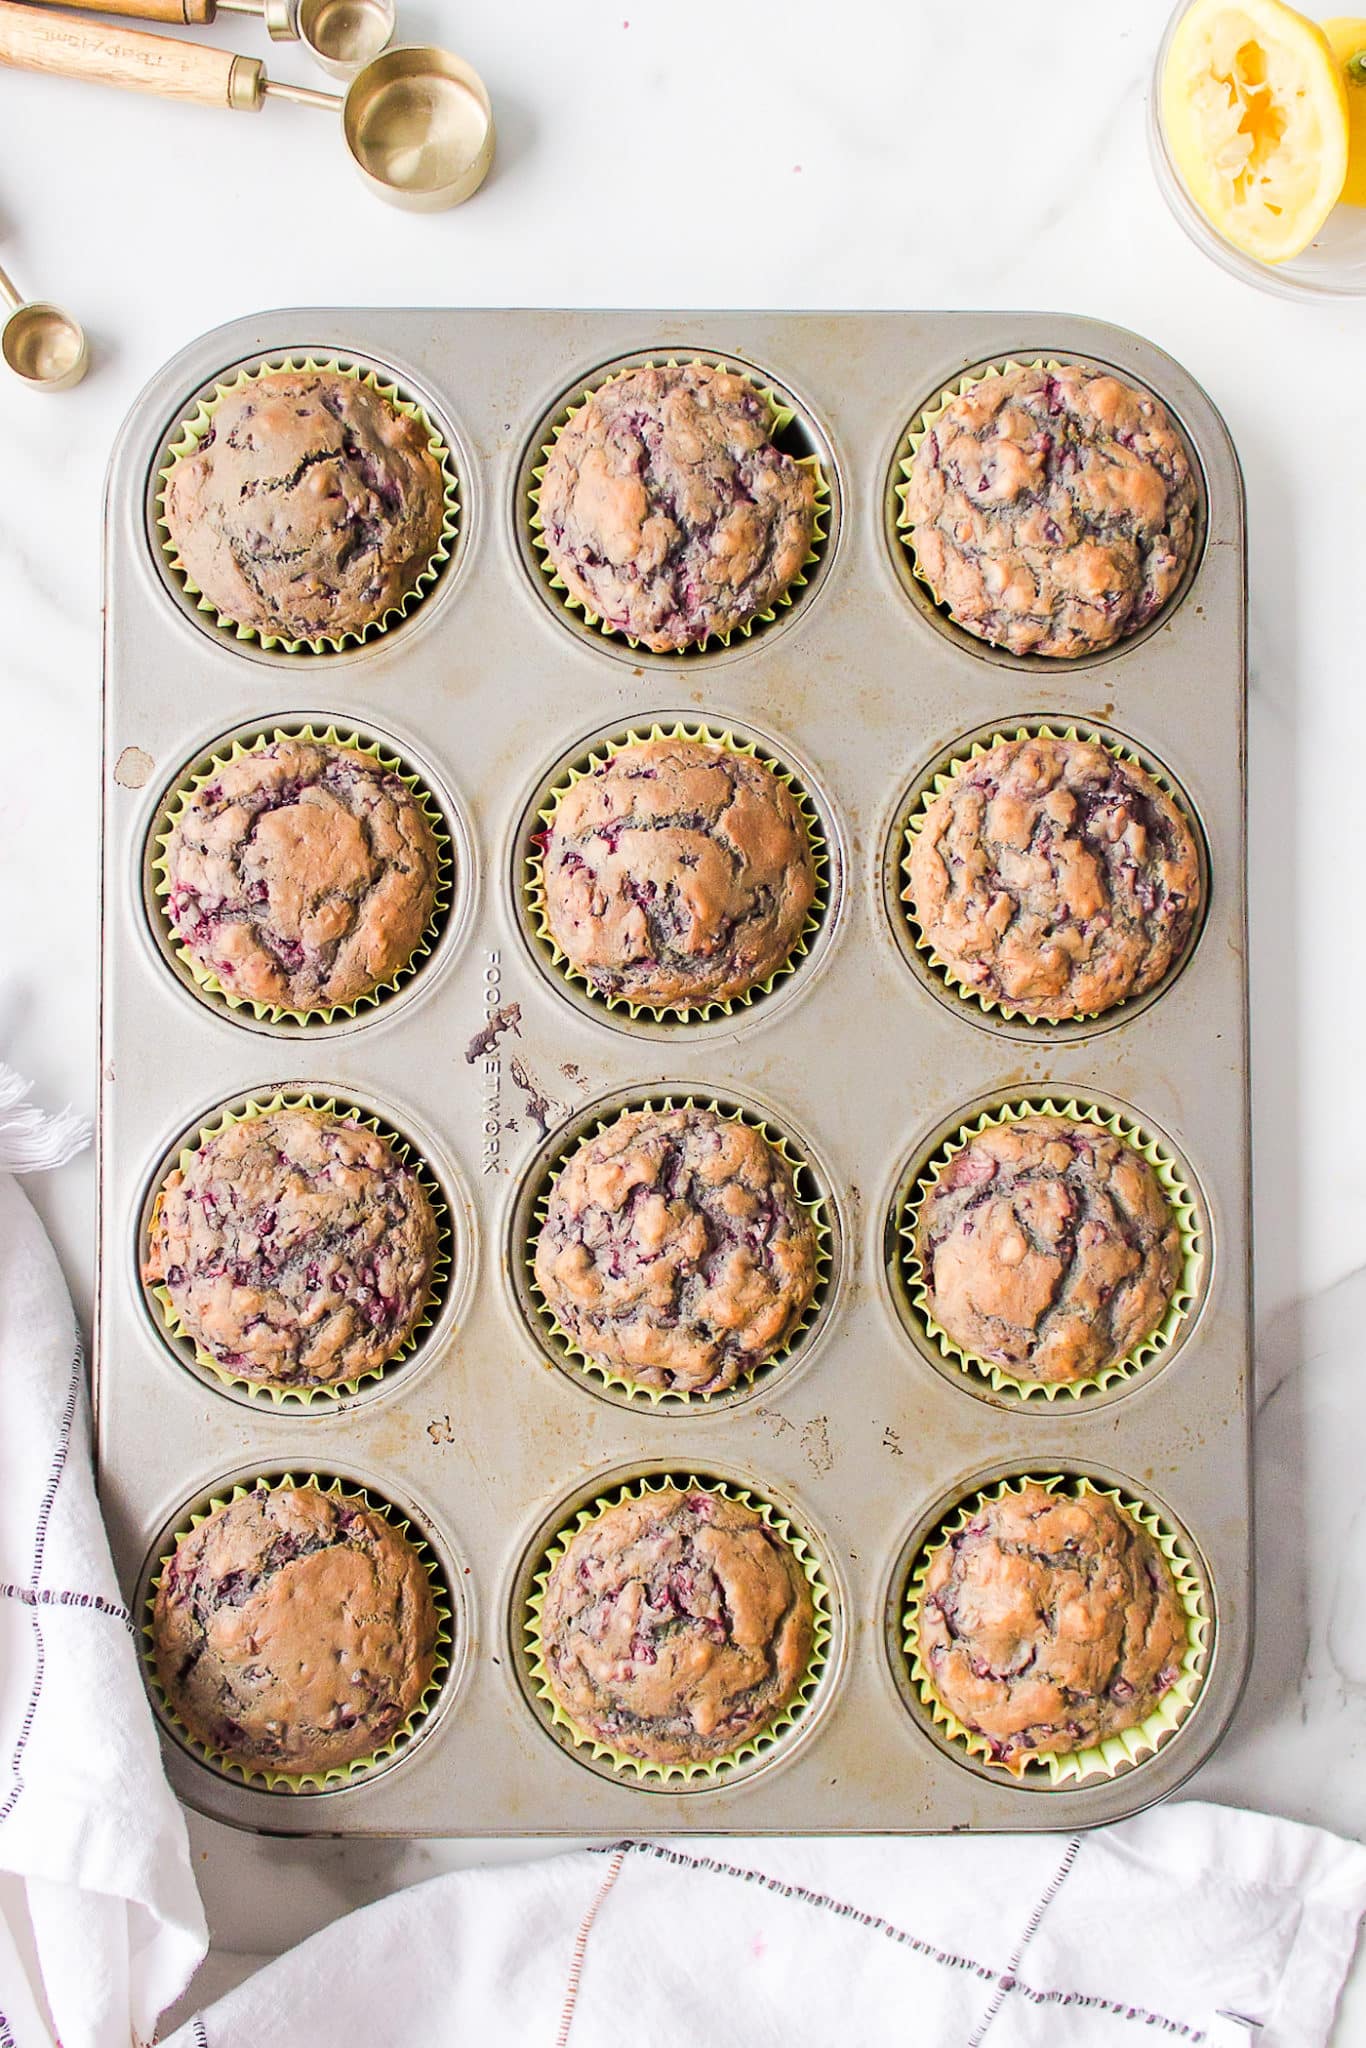 Baked vegan blackberry muffins in yellow papers in a muffin tin.